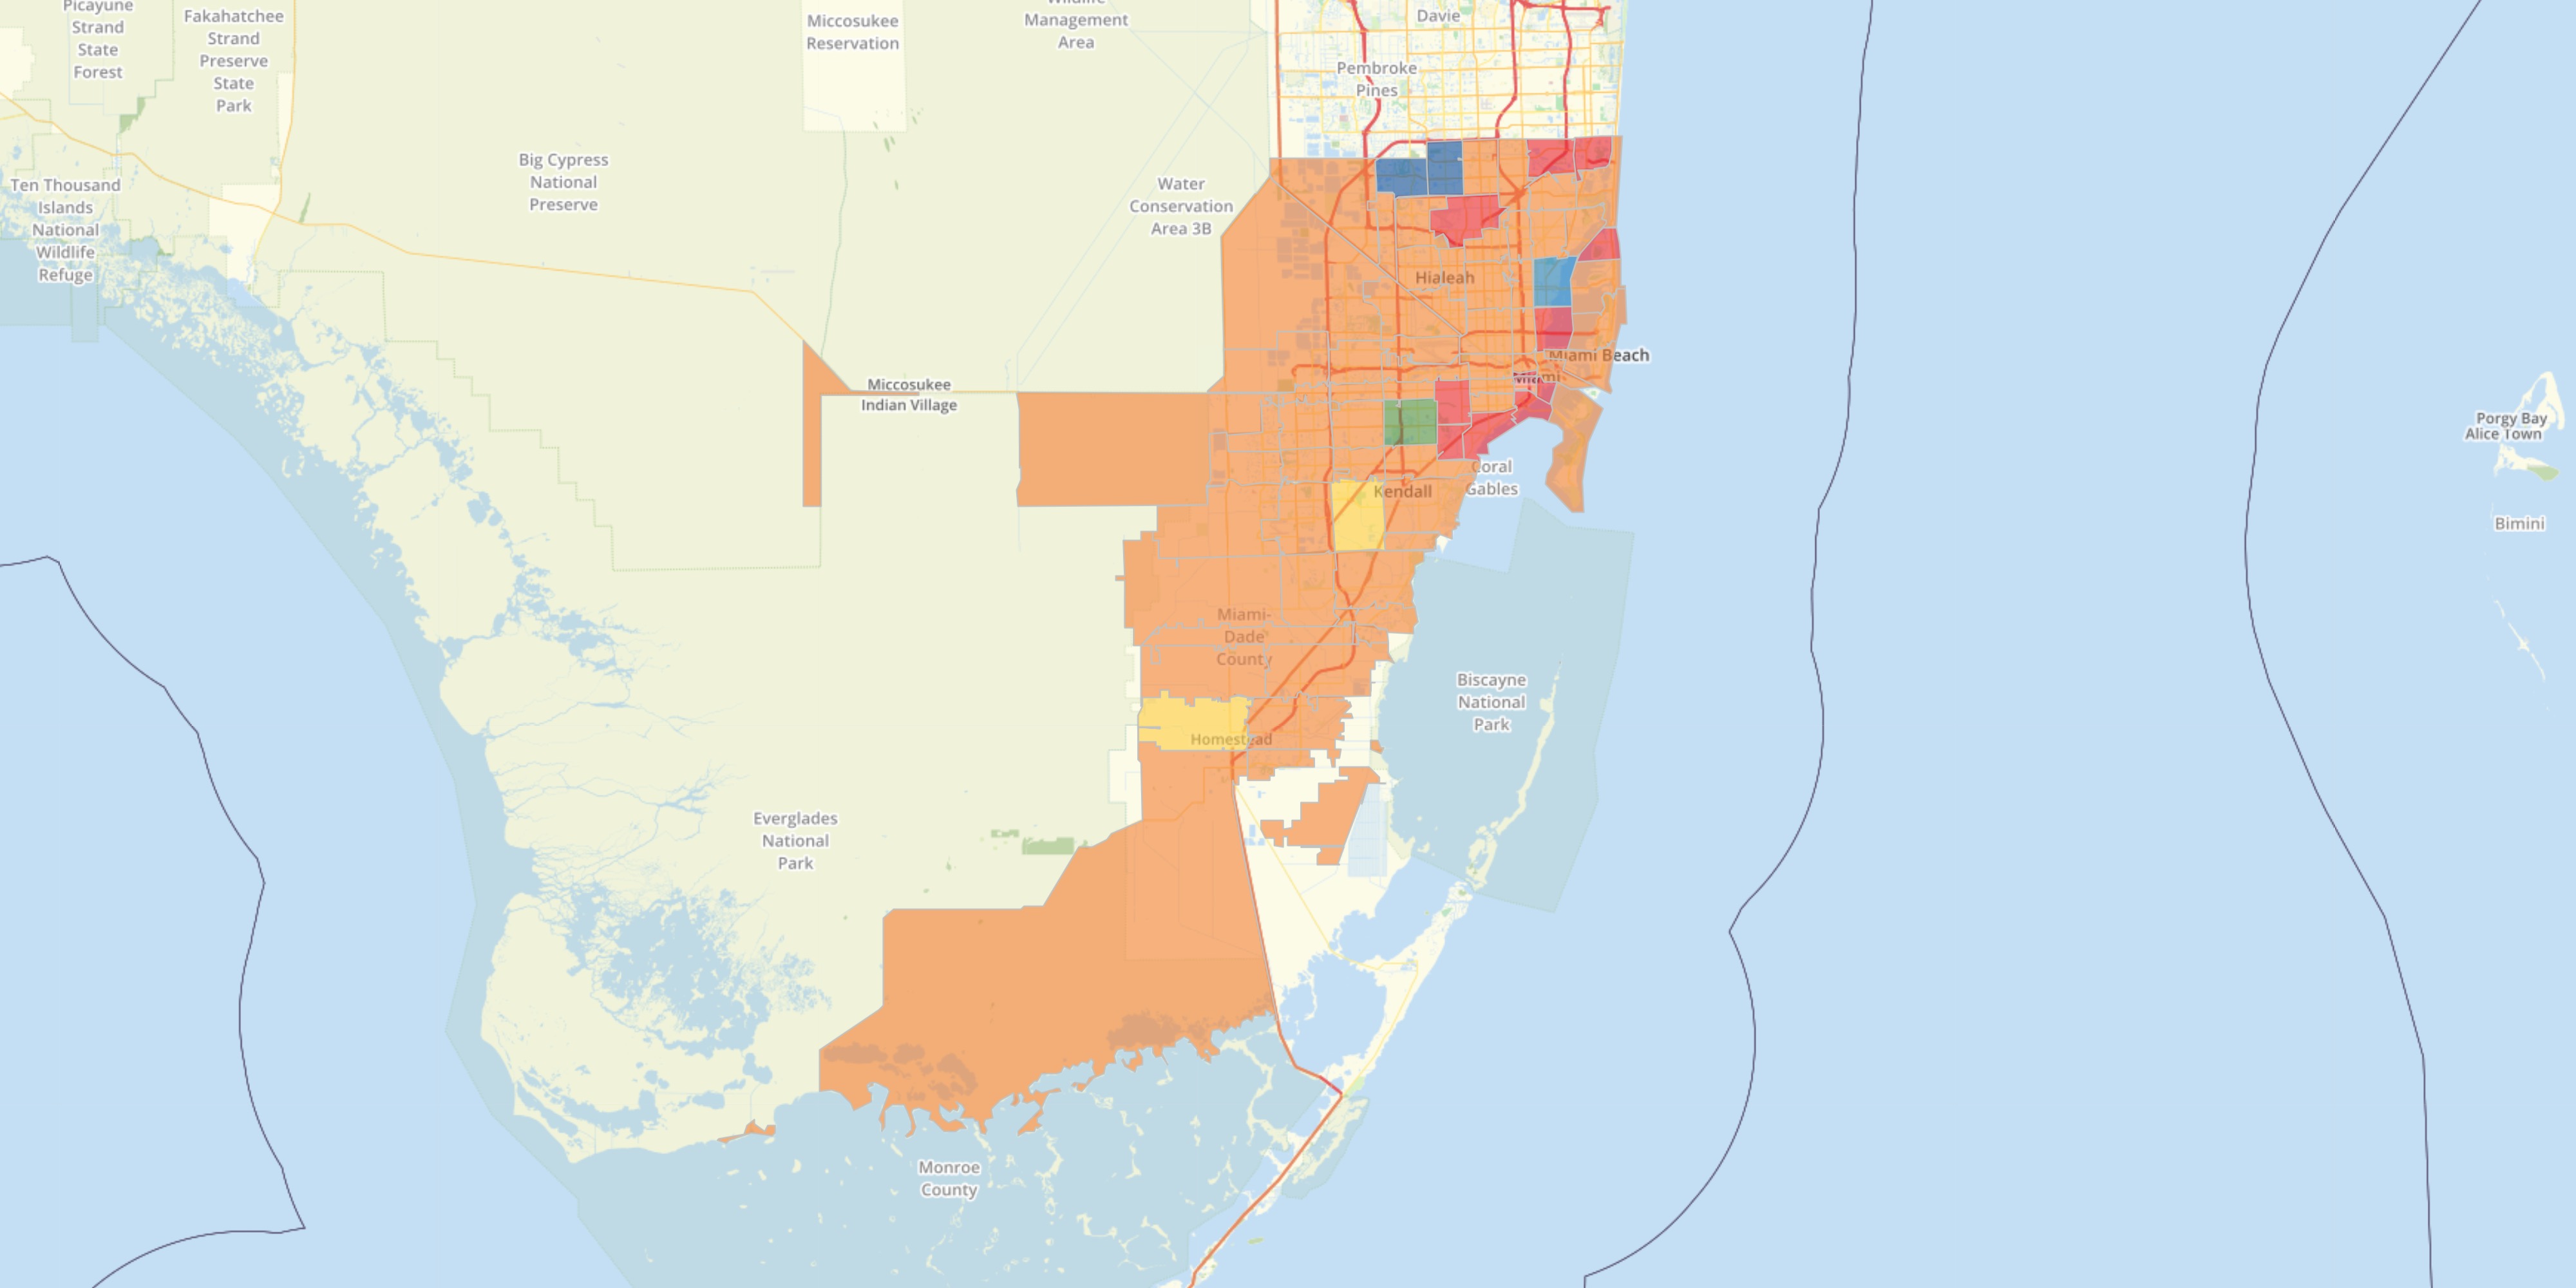 miami dade county zipcode map - maping resources